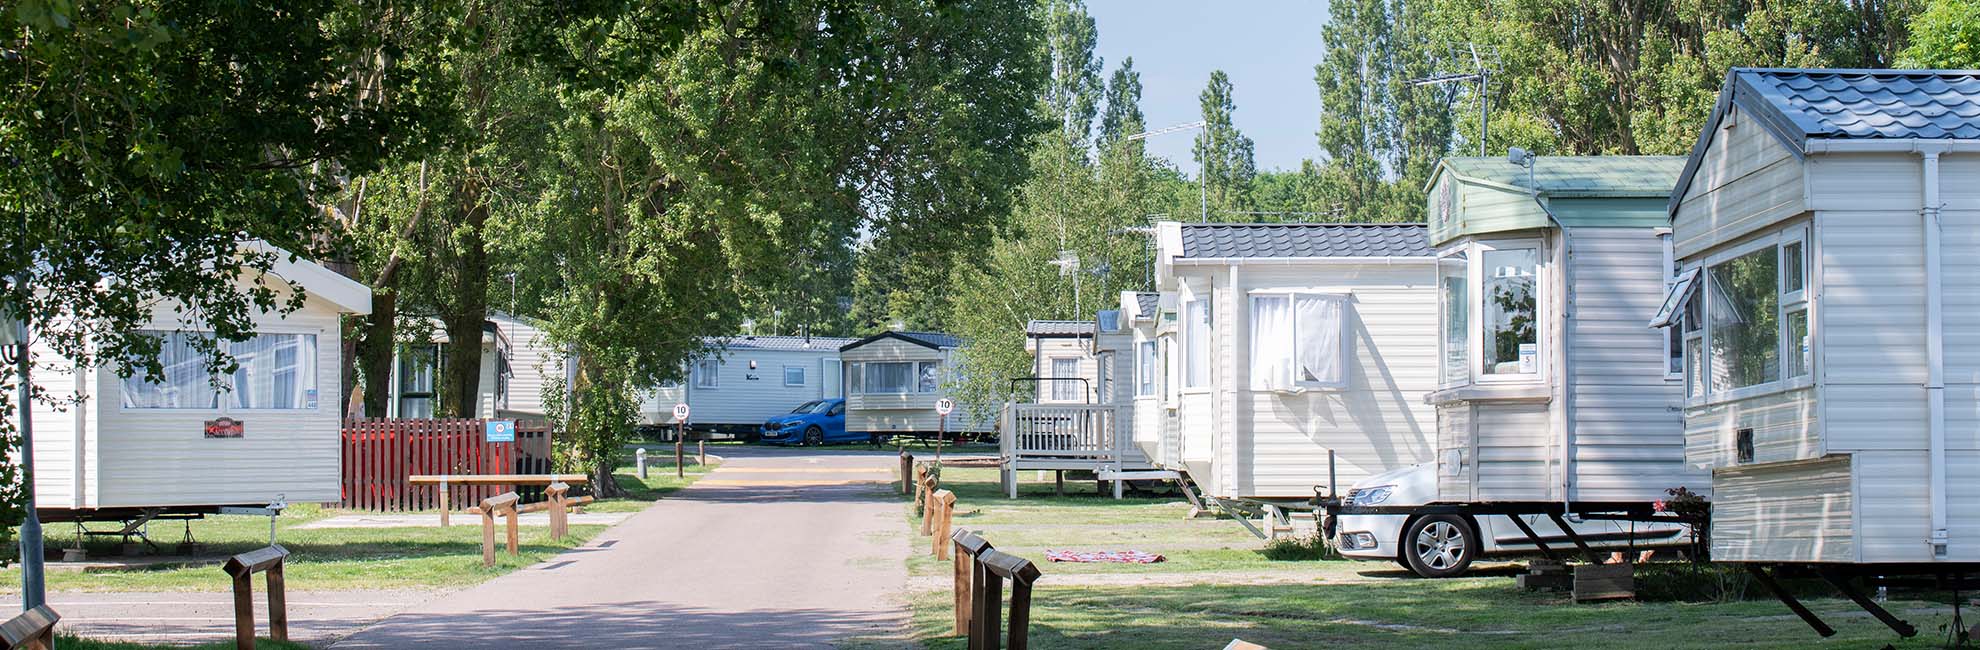 Caravans at Coopers Beach Holiday Park